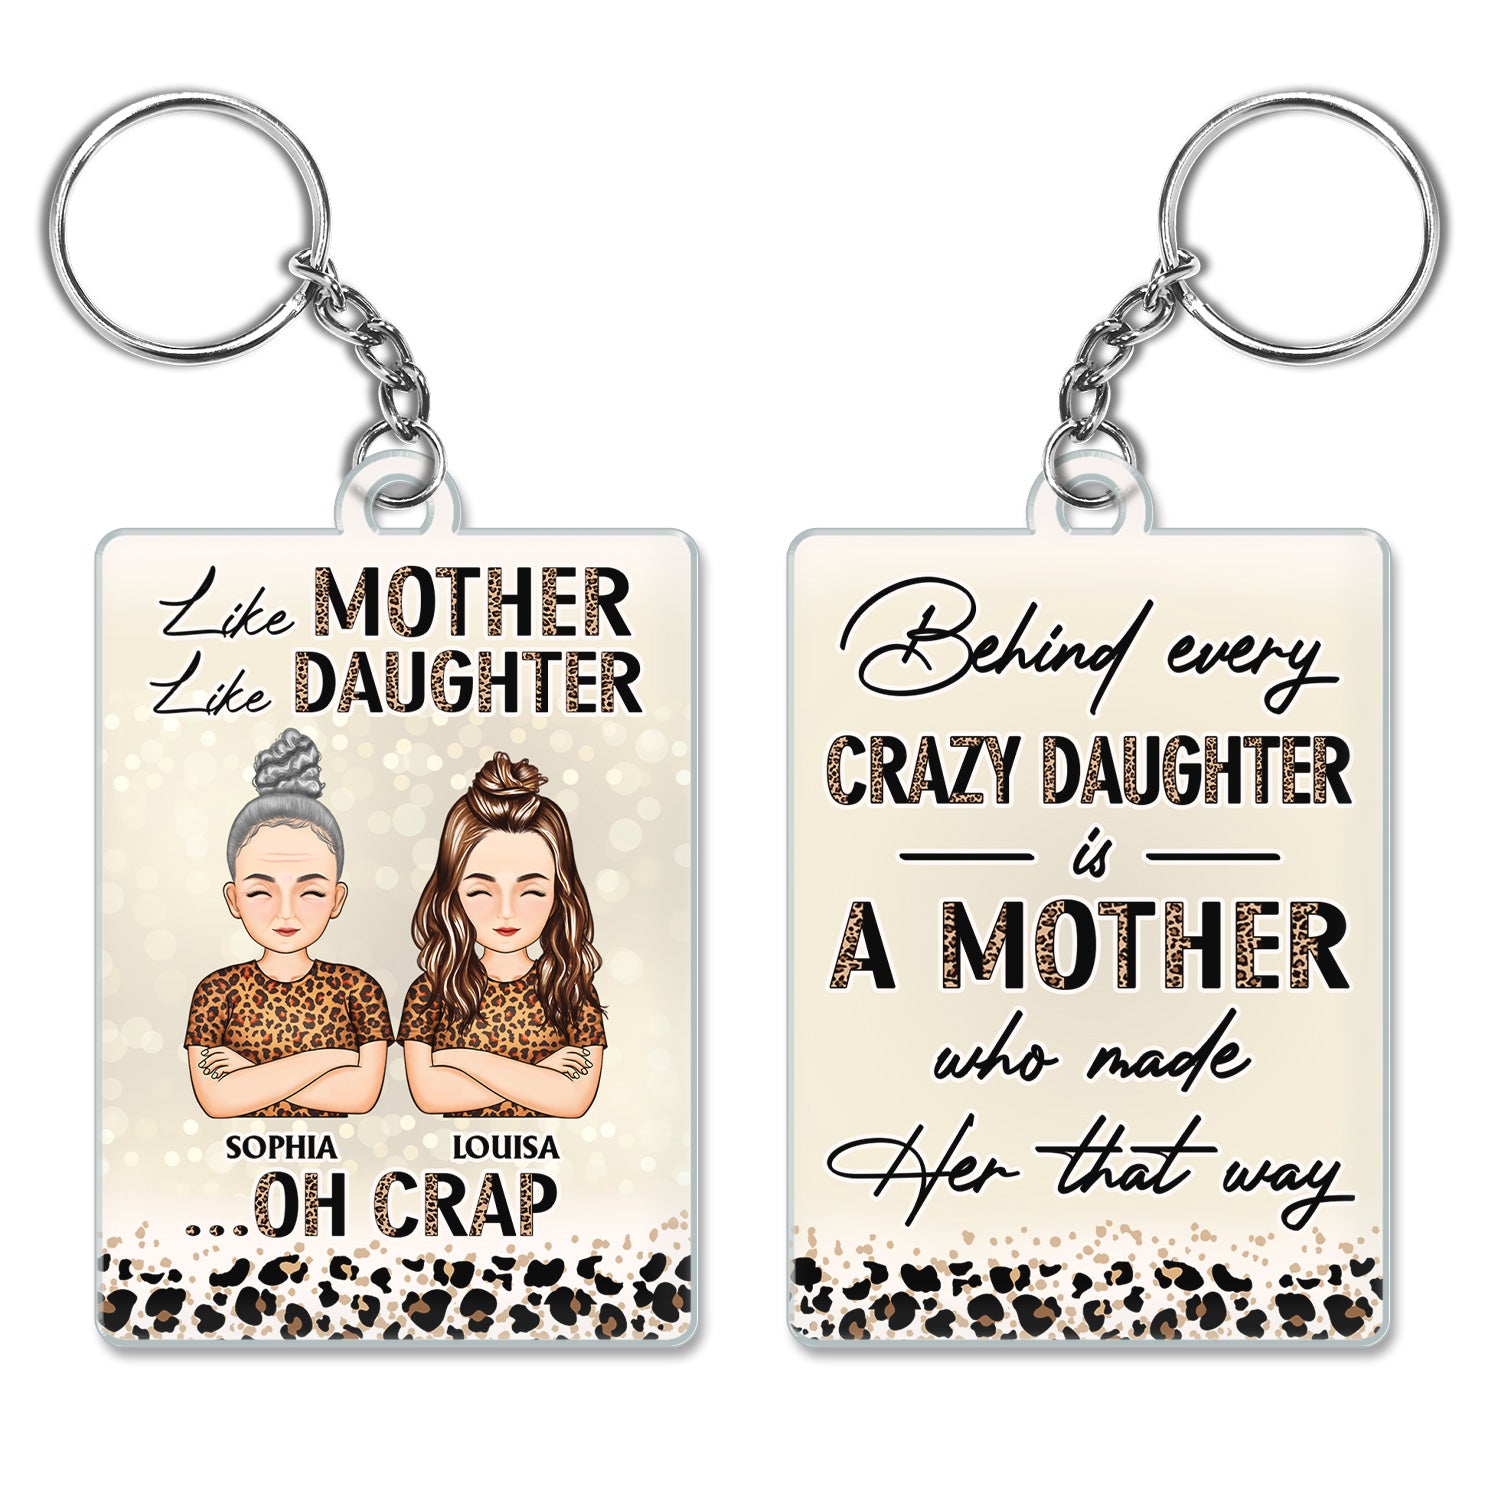 Behind Every Crazy Daughter Is A Mother Who Made Her That Way - Birthday, Loving Gift For Mommy, Mother, Grandma, Grandmother - Personalized Custom Acrylic Keychain